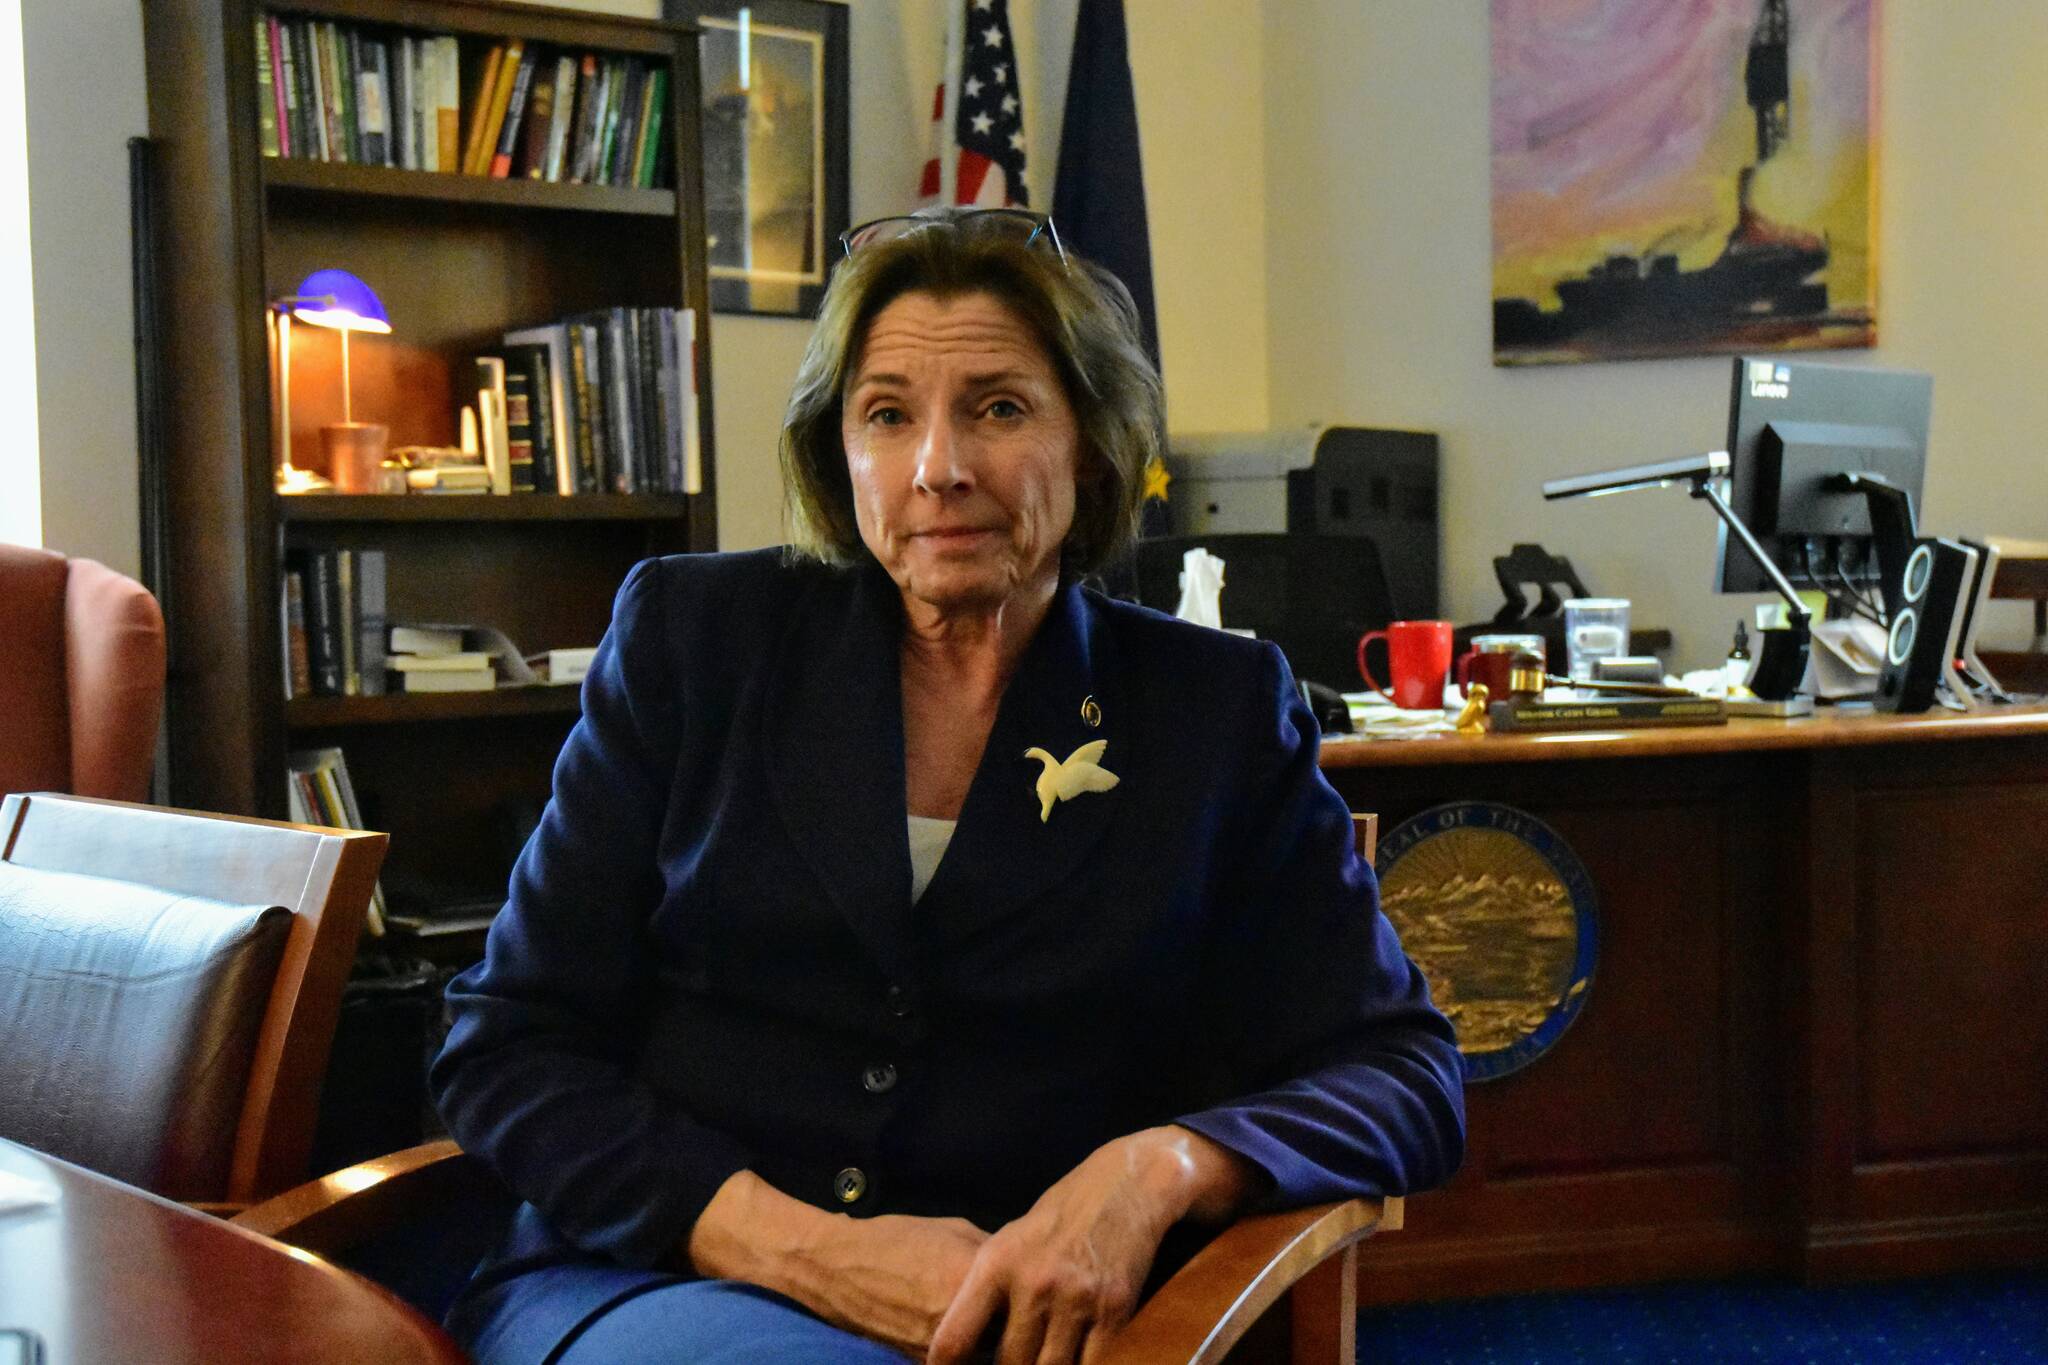 Then-Senate President Cathy Giessel, R-Anchorage, sits in her office at the State Capitol in February 2020. After a recount, Giessel has been reaffirmed as the winner of a narrow three-way race for an Anchorage-area Senate seat.  (Peter Segall / Juneau Empire File)